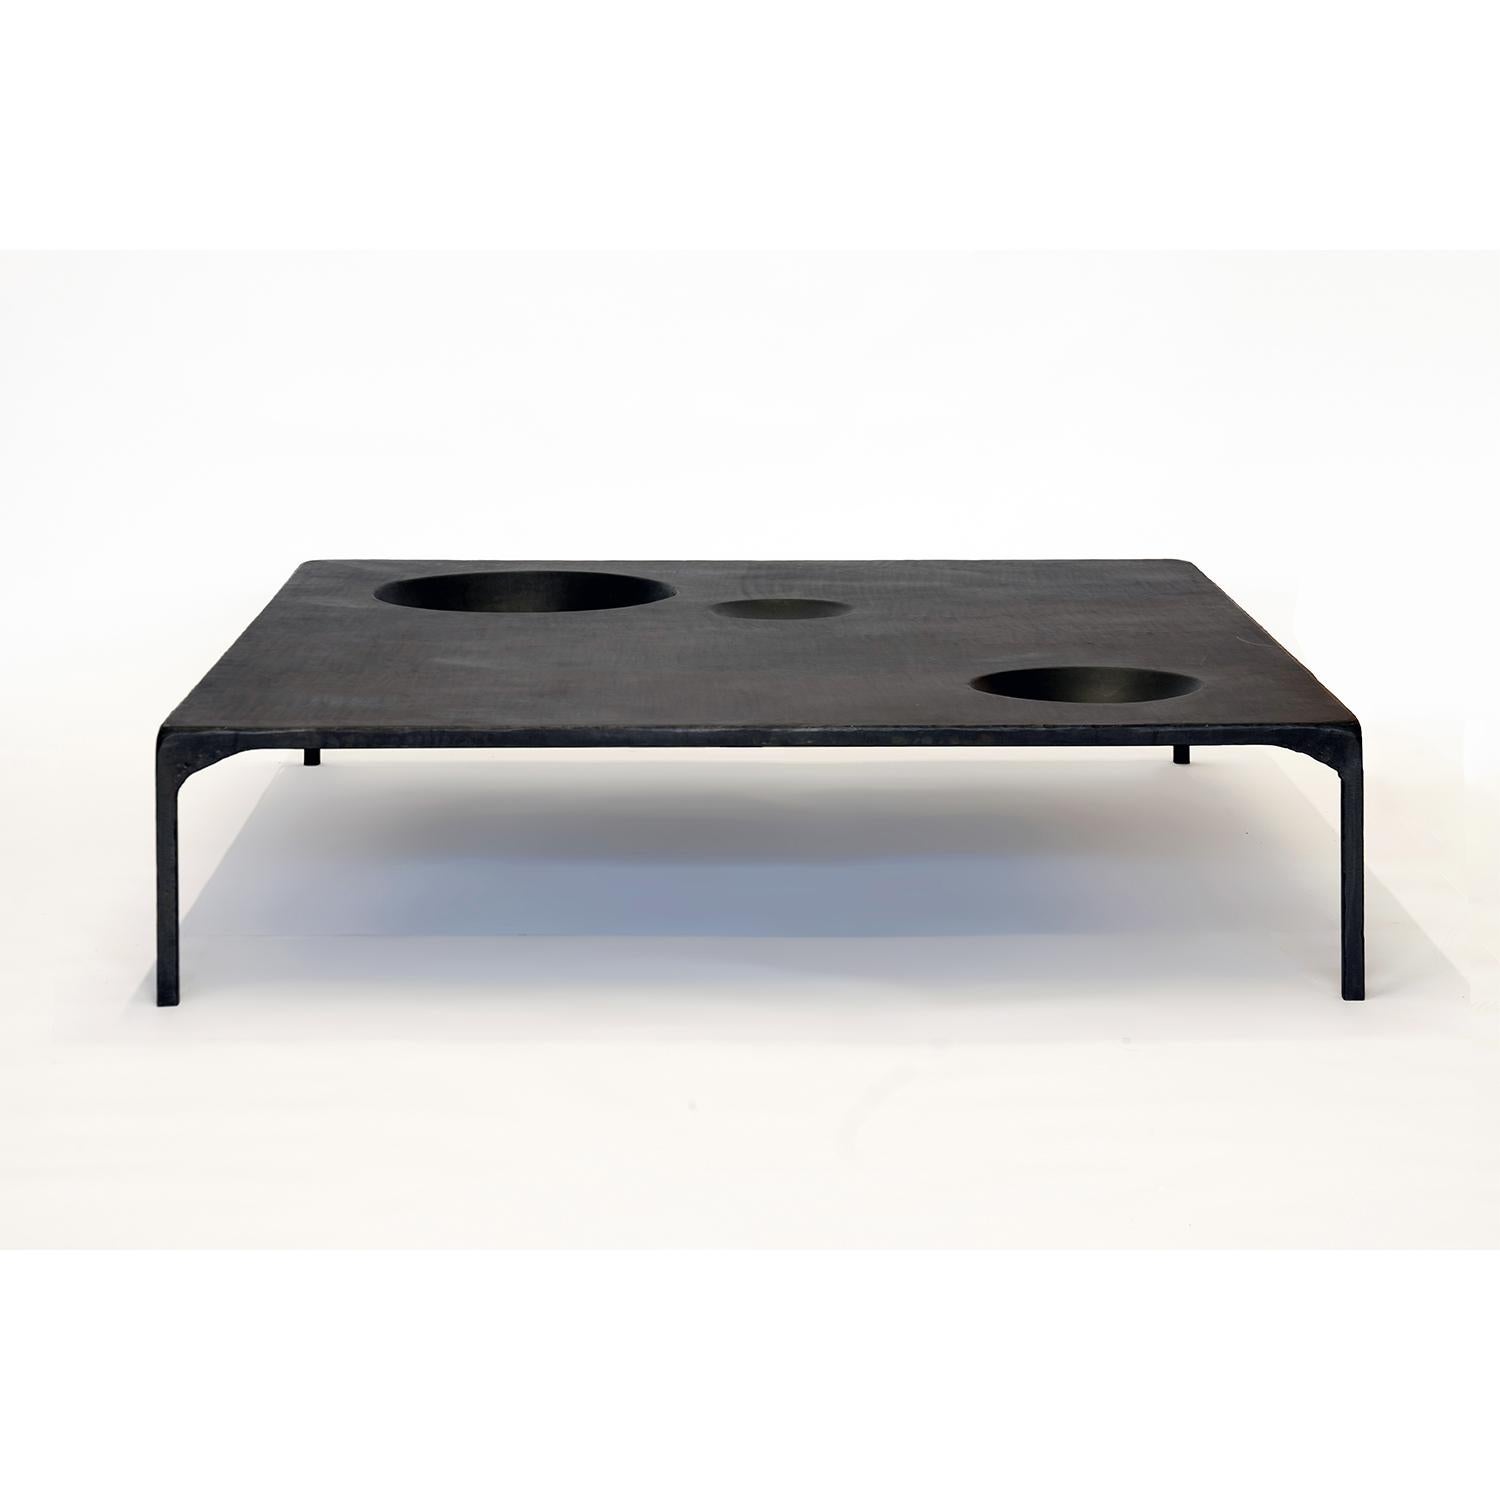 TABLE NO. 11 - COFFEE TABLE
J.M. Szymanski
d. 2018
 
Handmade entirely out of blackened and waxed steel, this table features geometric voids within the table itself. Also available with food-safe, ceramic, bowl inserts. Each one is made specifically